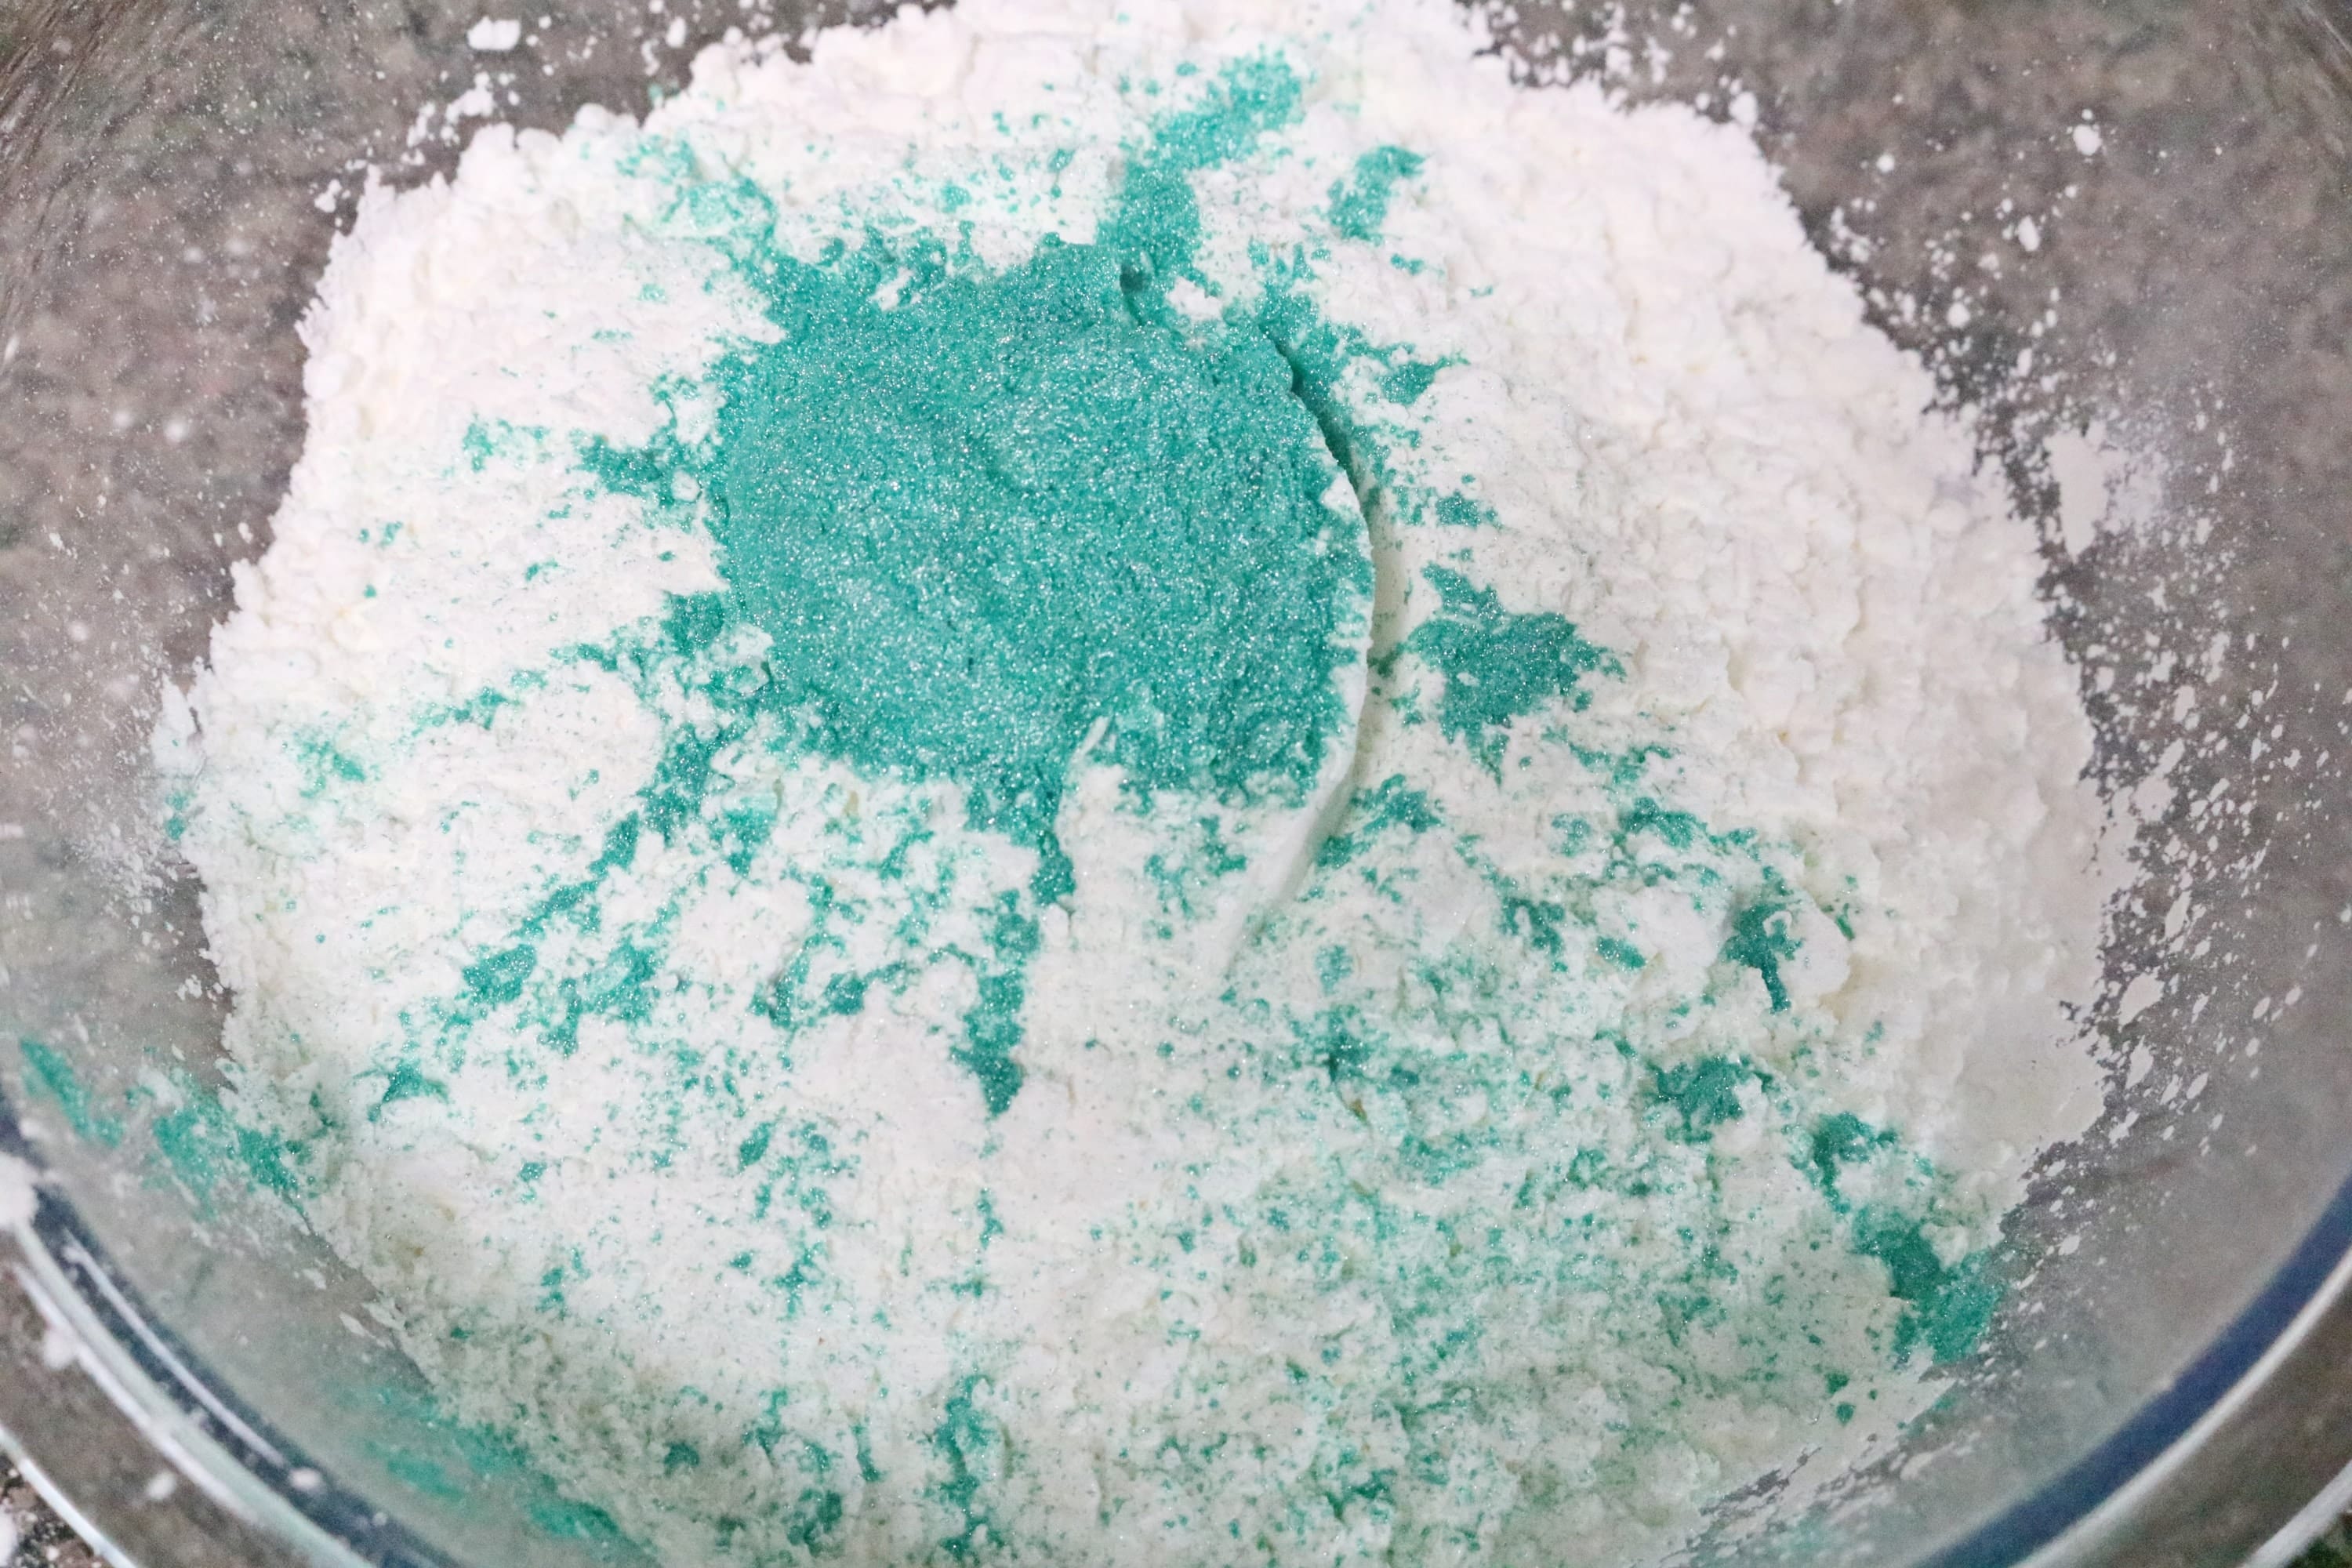 Dry ingredients for homemade bath bombs in a glass bowl with blue mica powder